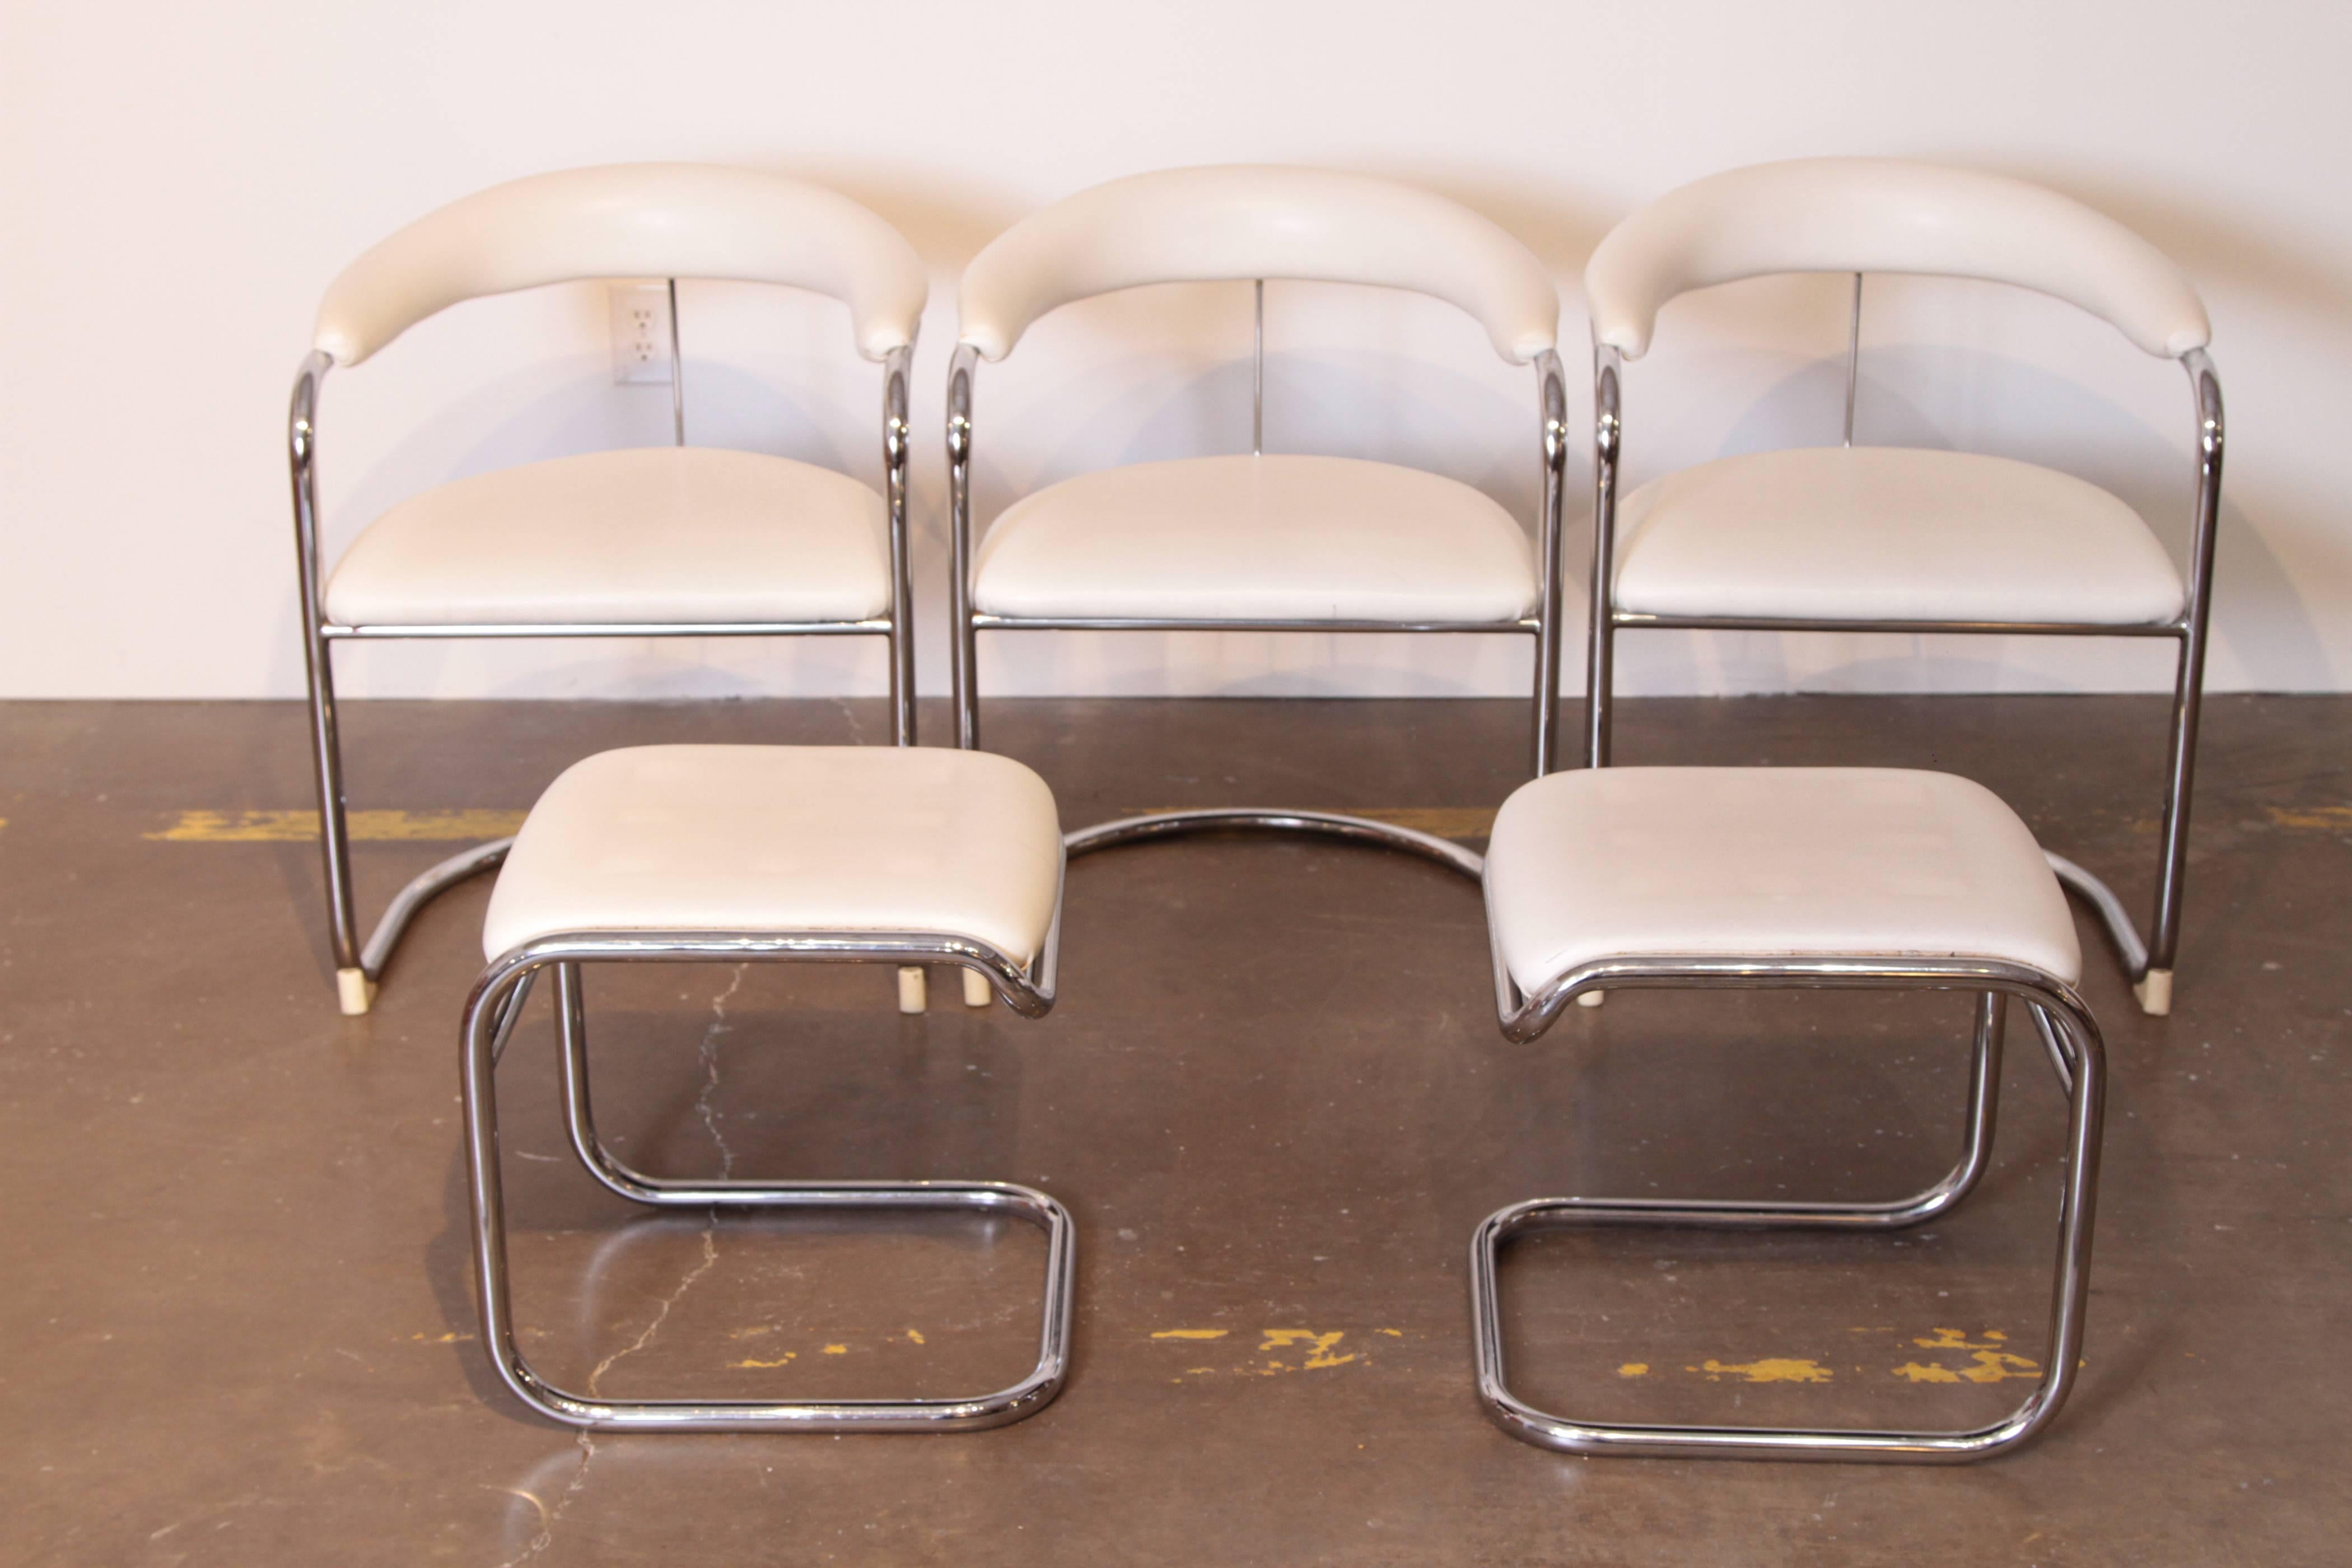 Thonet Mid Century Modern Side Chairs / Ottomans, Five piece set, Leather and Tubular Chrome.  Mid-Century.  

Iconic chair design originally by Anton Lorenz  SS33 for Thonet, likely later US production with plastic front glides.  With matching pair